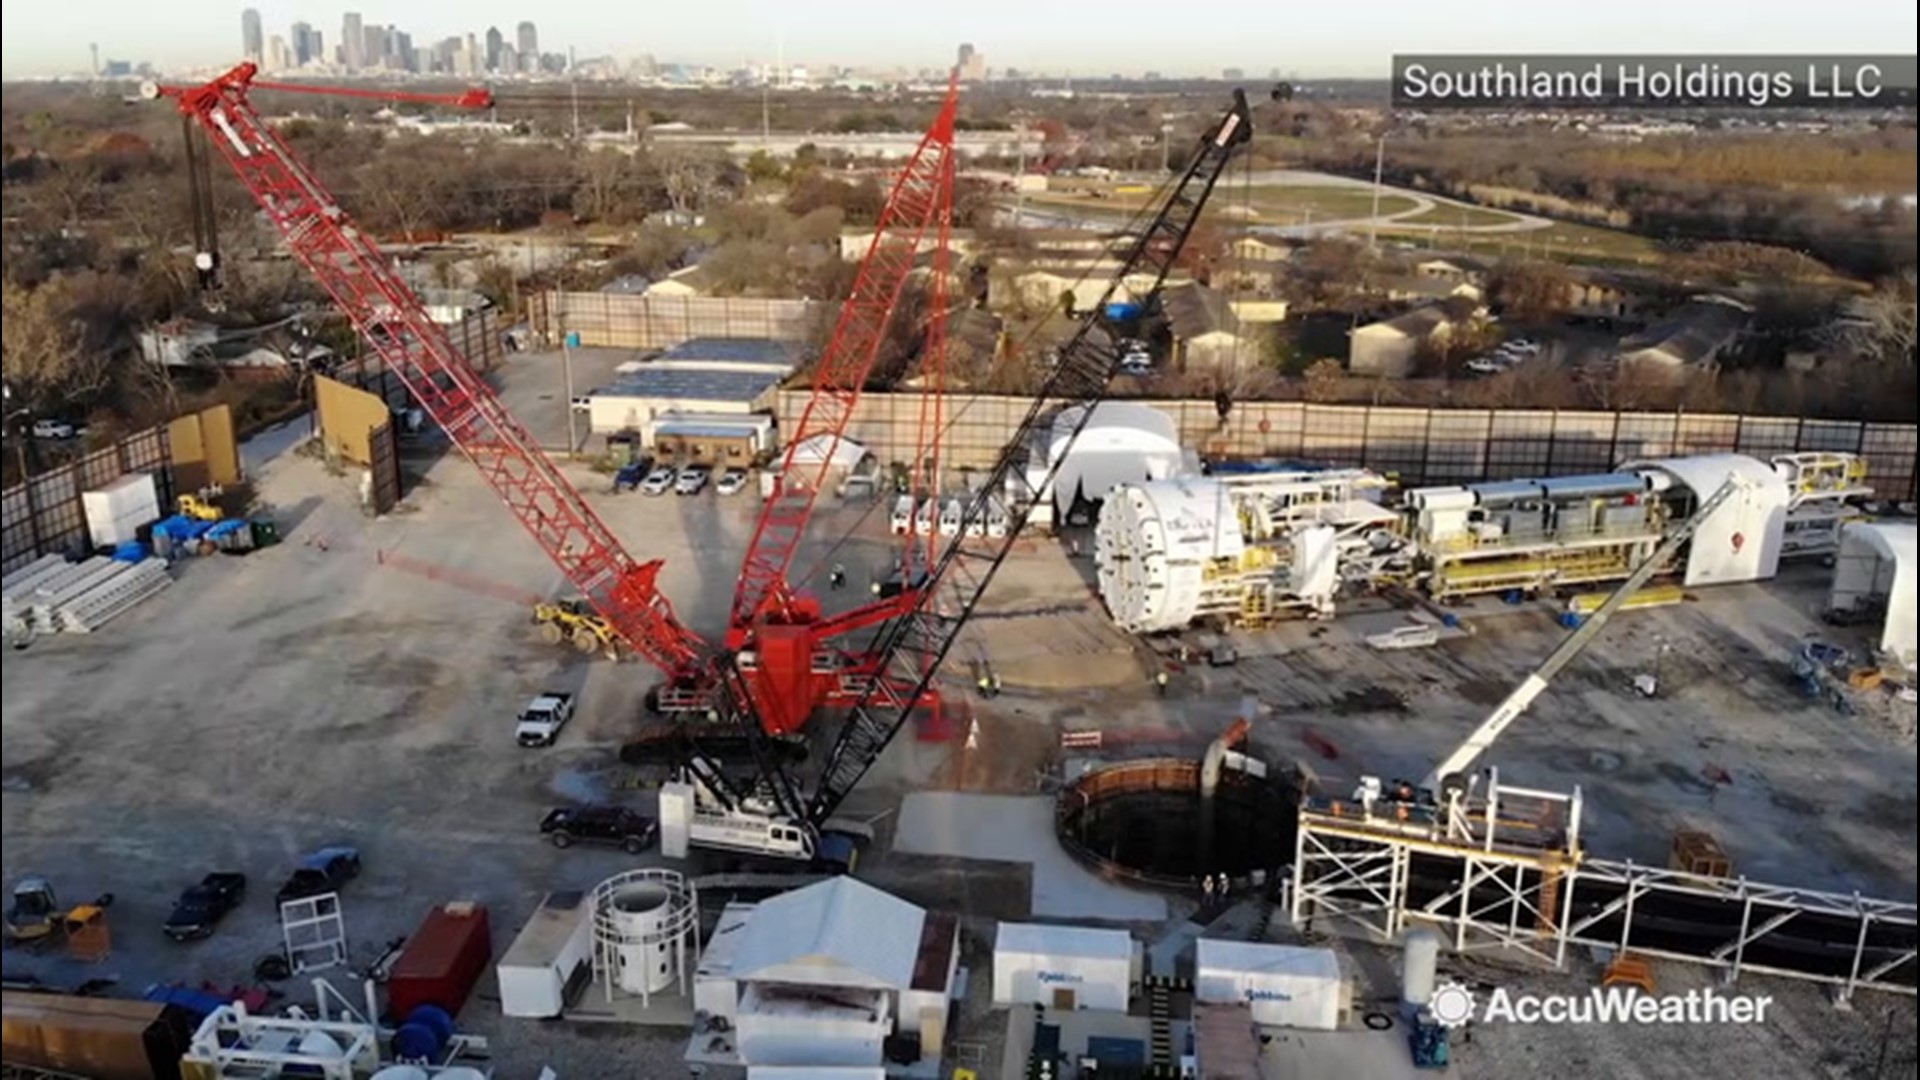 A massive tunneling machine will be used to create a new flood protection system under Dallas. AccuWeather's Bill Wadell looks at how it will work and its cost.